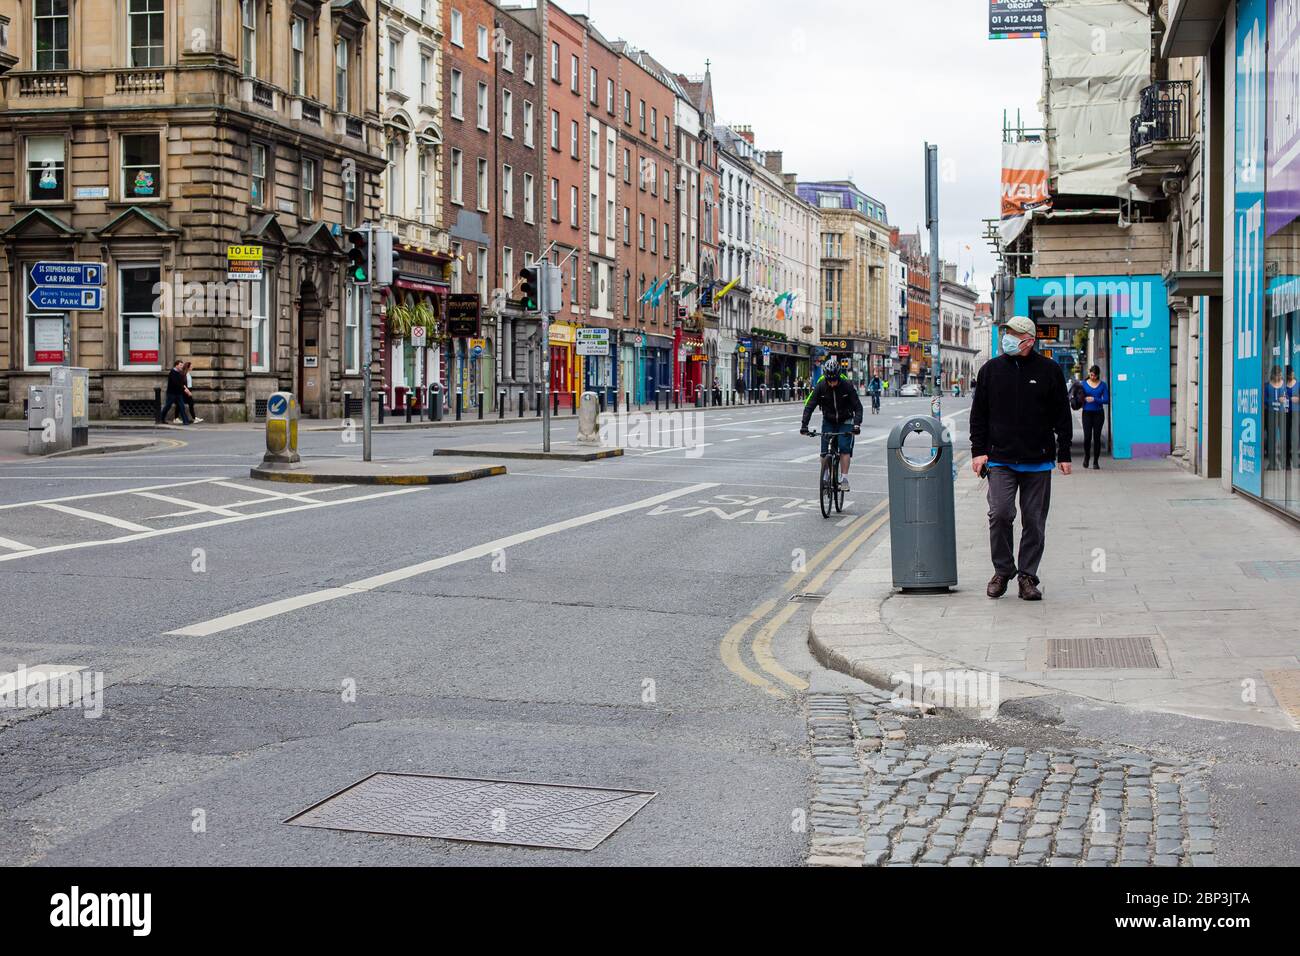 Deserted Dame Street in Dublin City Centre. Closed businesses and reduced traffic due to Coronavirus pandemic restrictions. May 2020, Dublin, Ireland Stock Photo